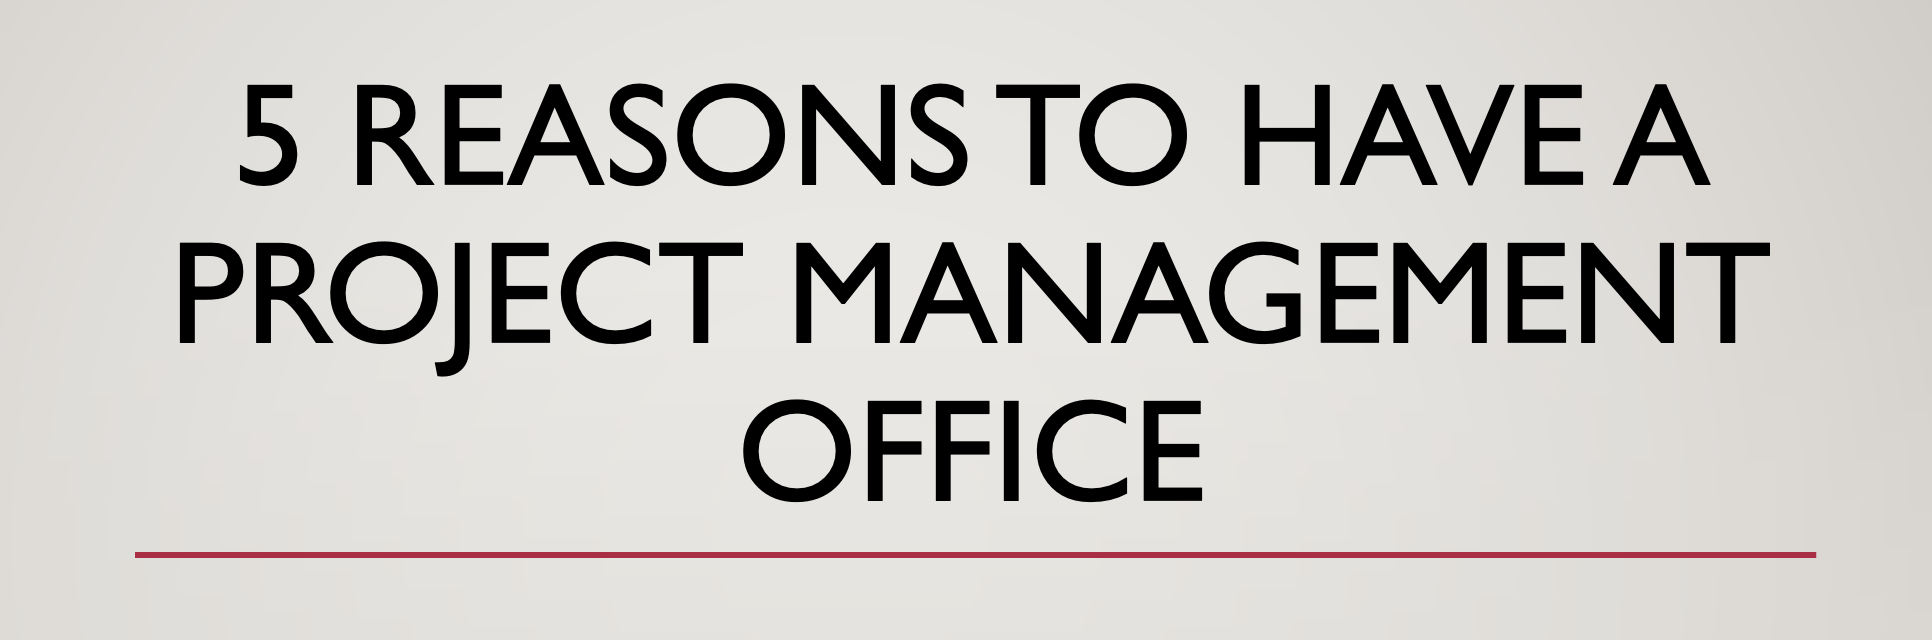 5 Reasons To Have a Project Management Office